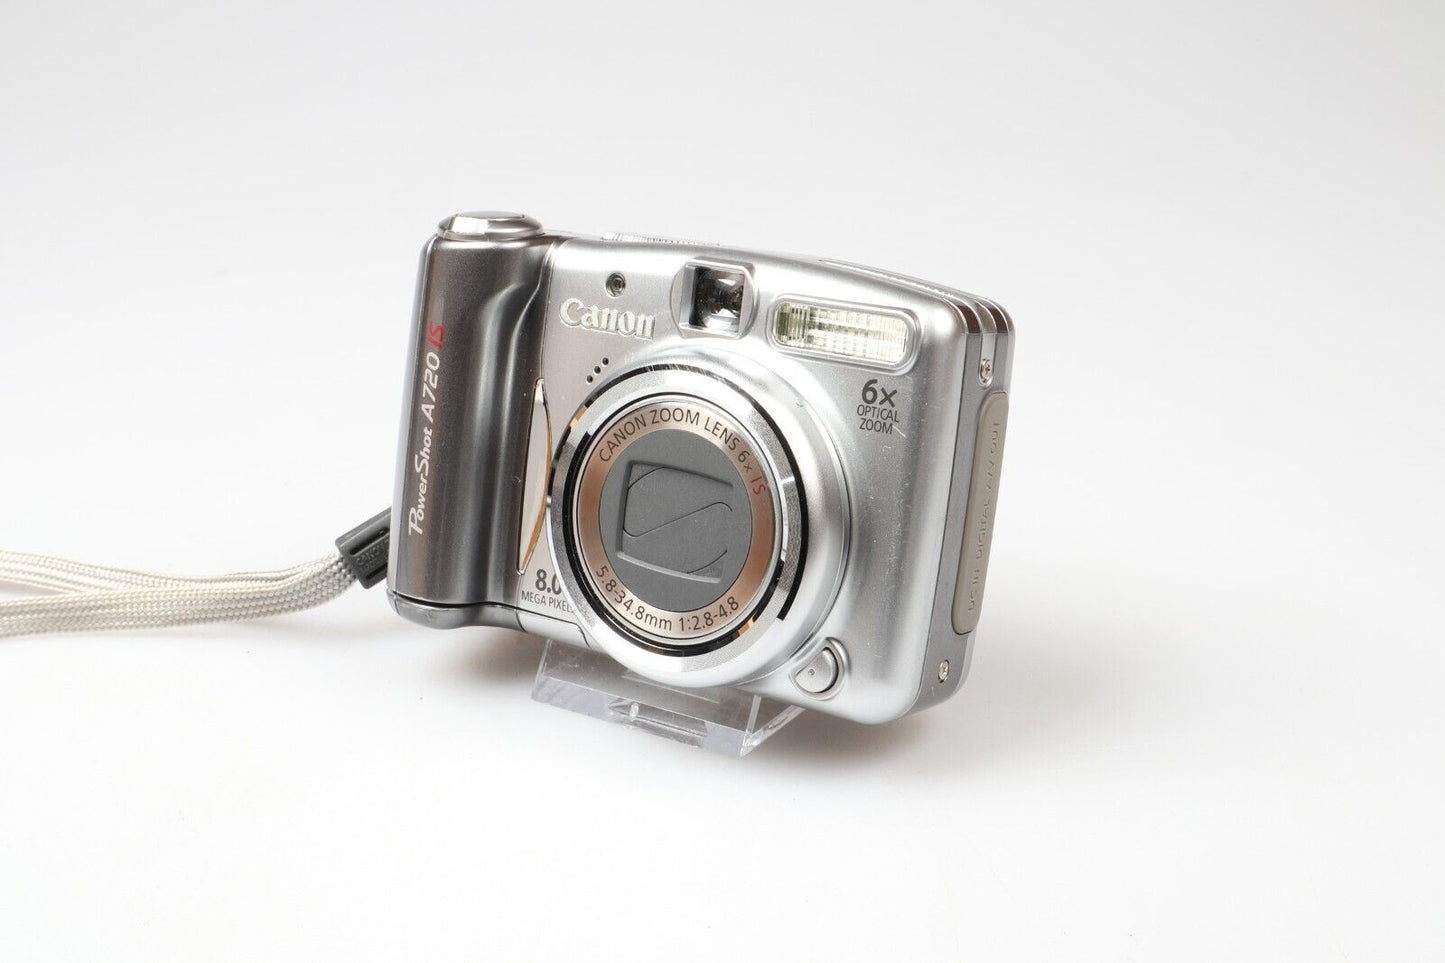 Canon Powershot A720 IS | Digital Compact Camera | 8.0MP | Silver